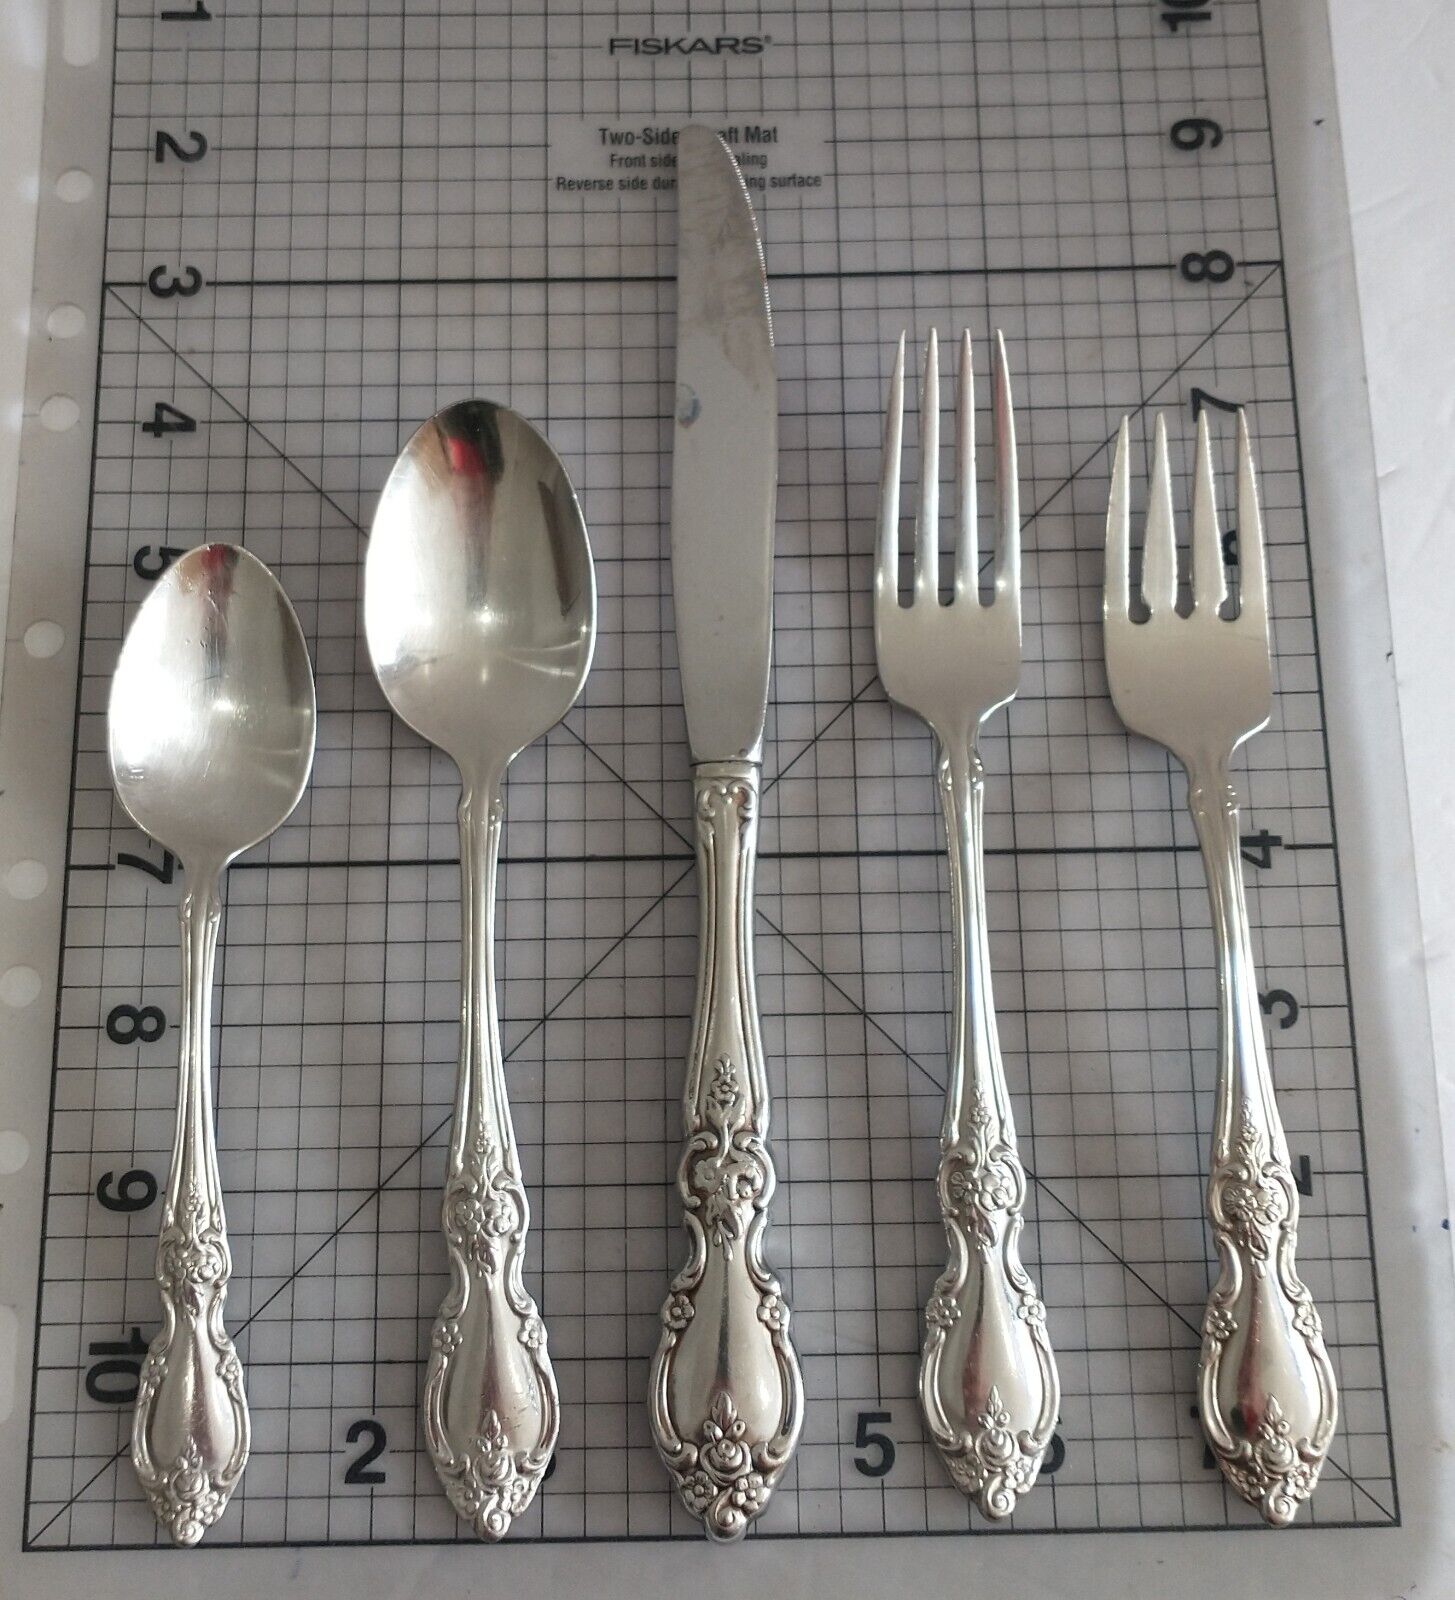 Oneida Louisiana Stainless Flatware 19 Pc Service sans 1 Knife Glossy Floral